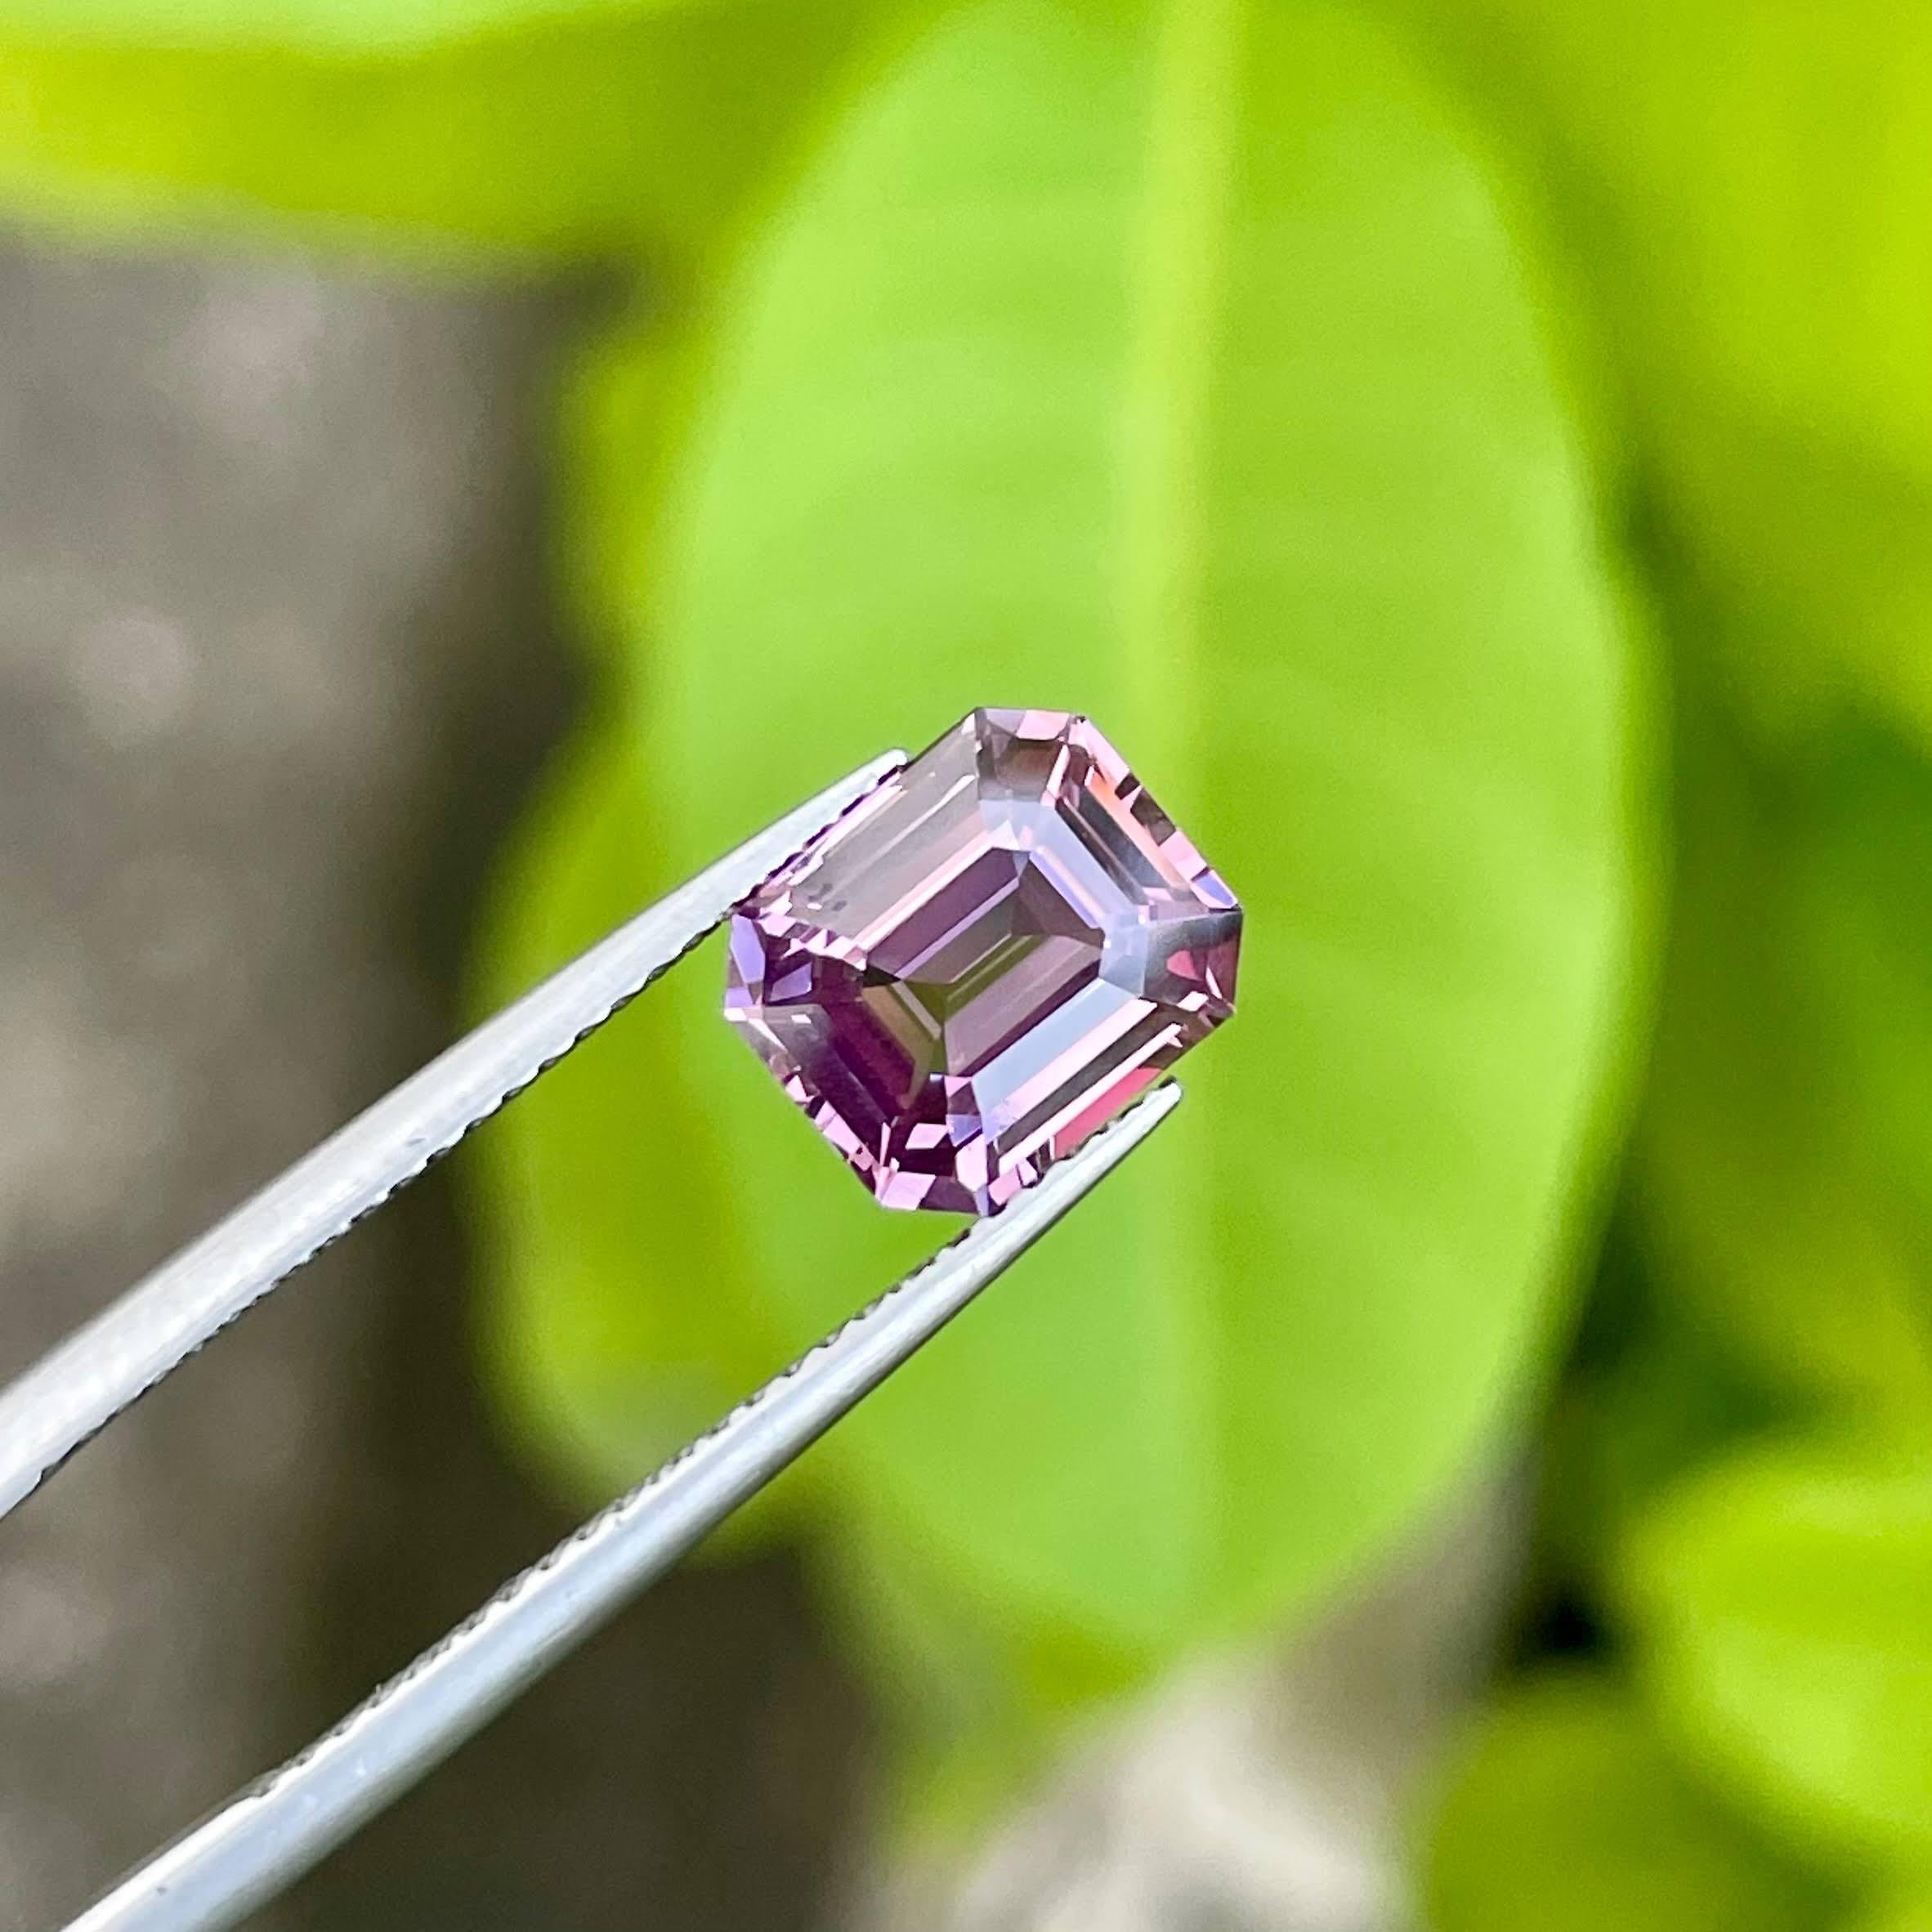 Modern 2.55 carats Pink Loose Spinel Stone Emerald Cut Natural Brumes Gemstone For Sale